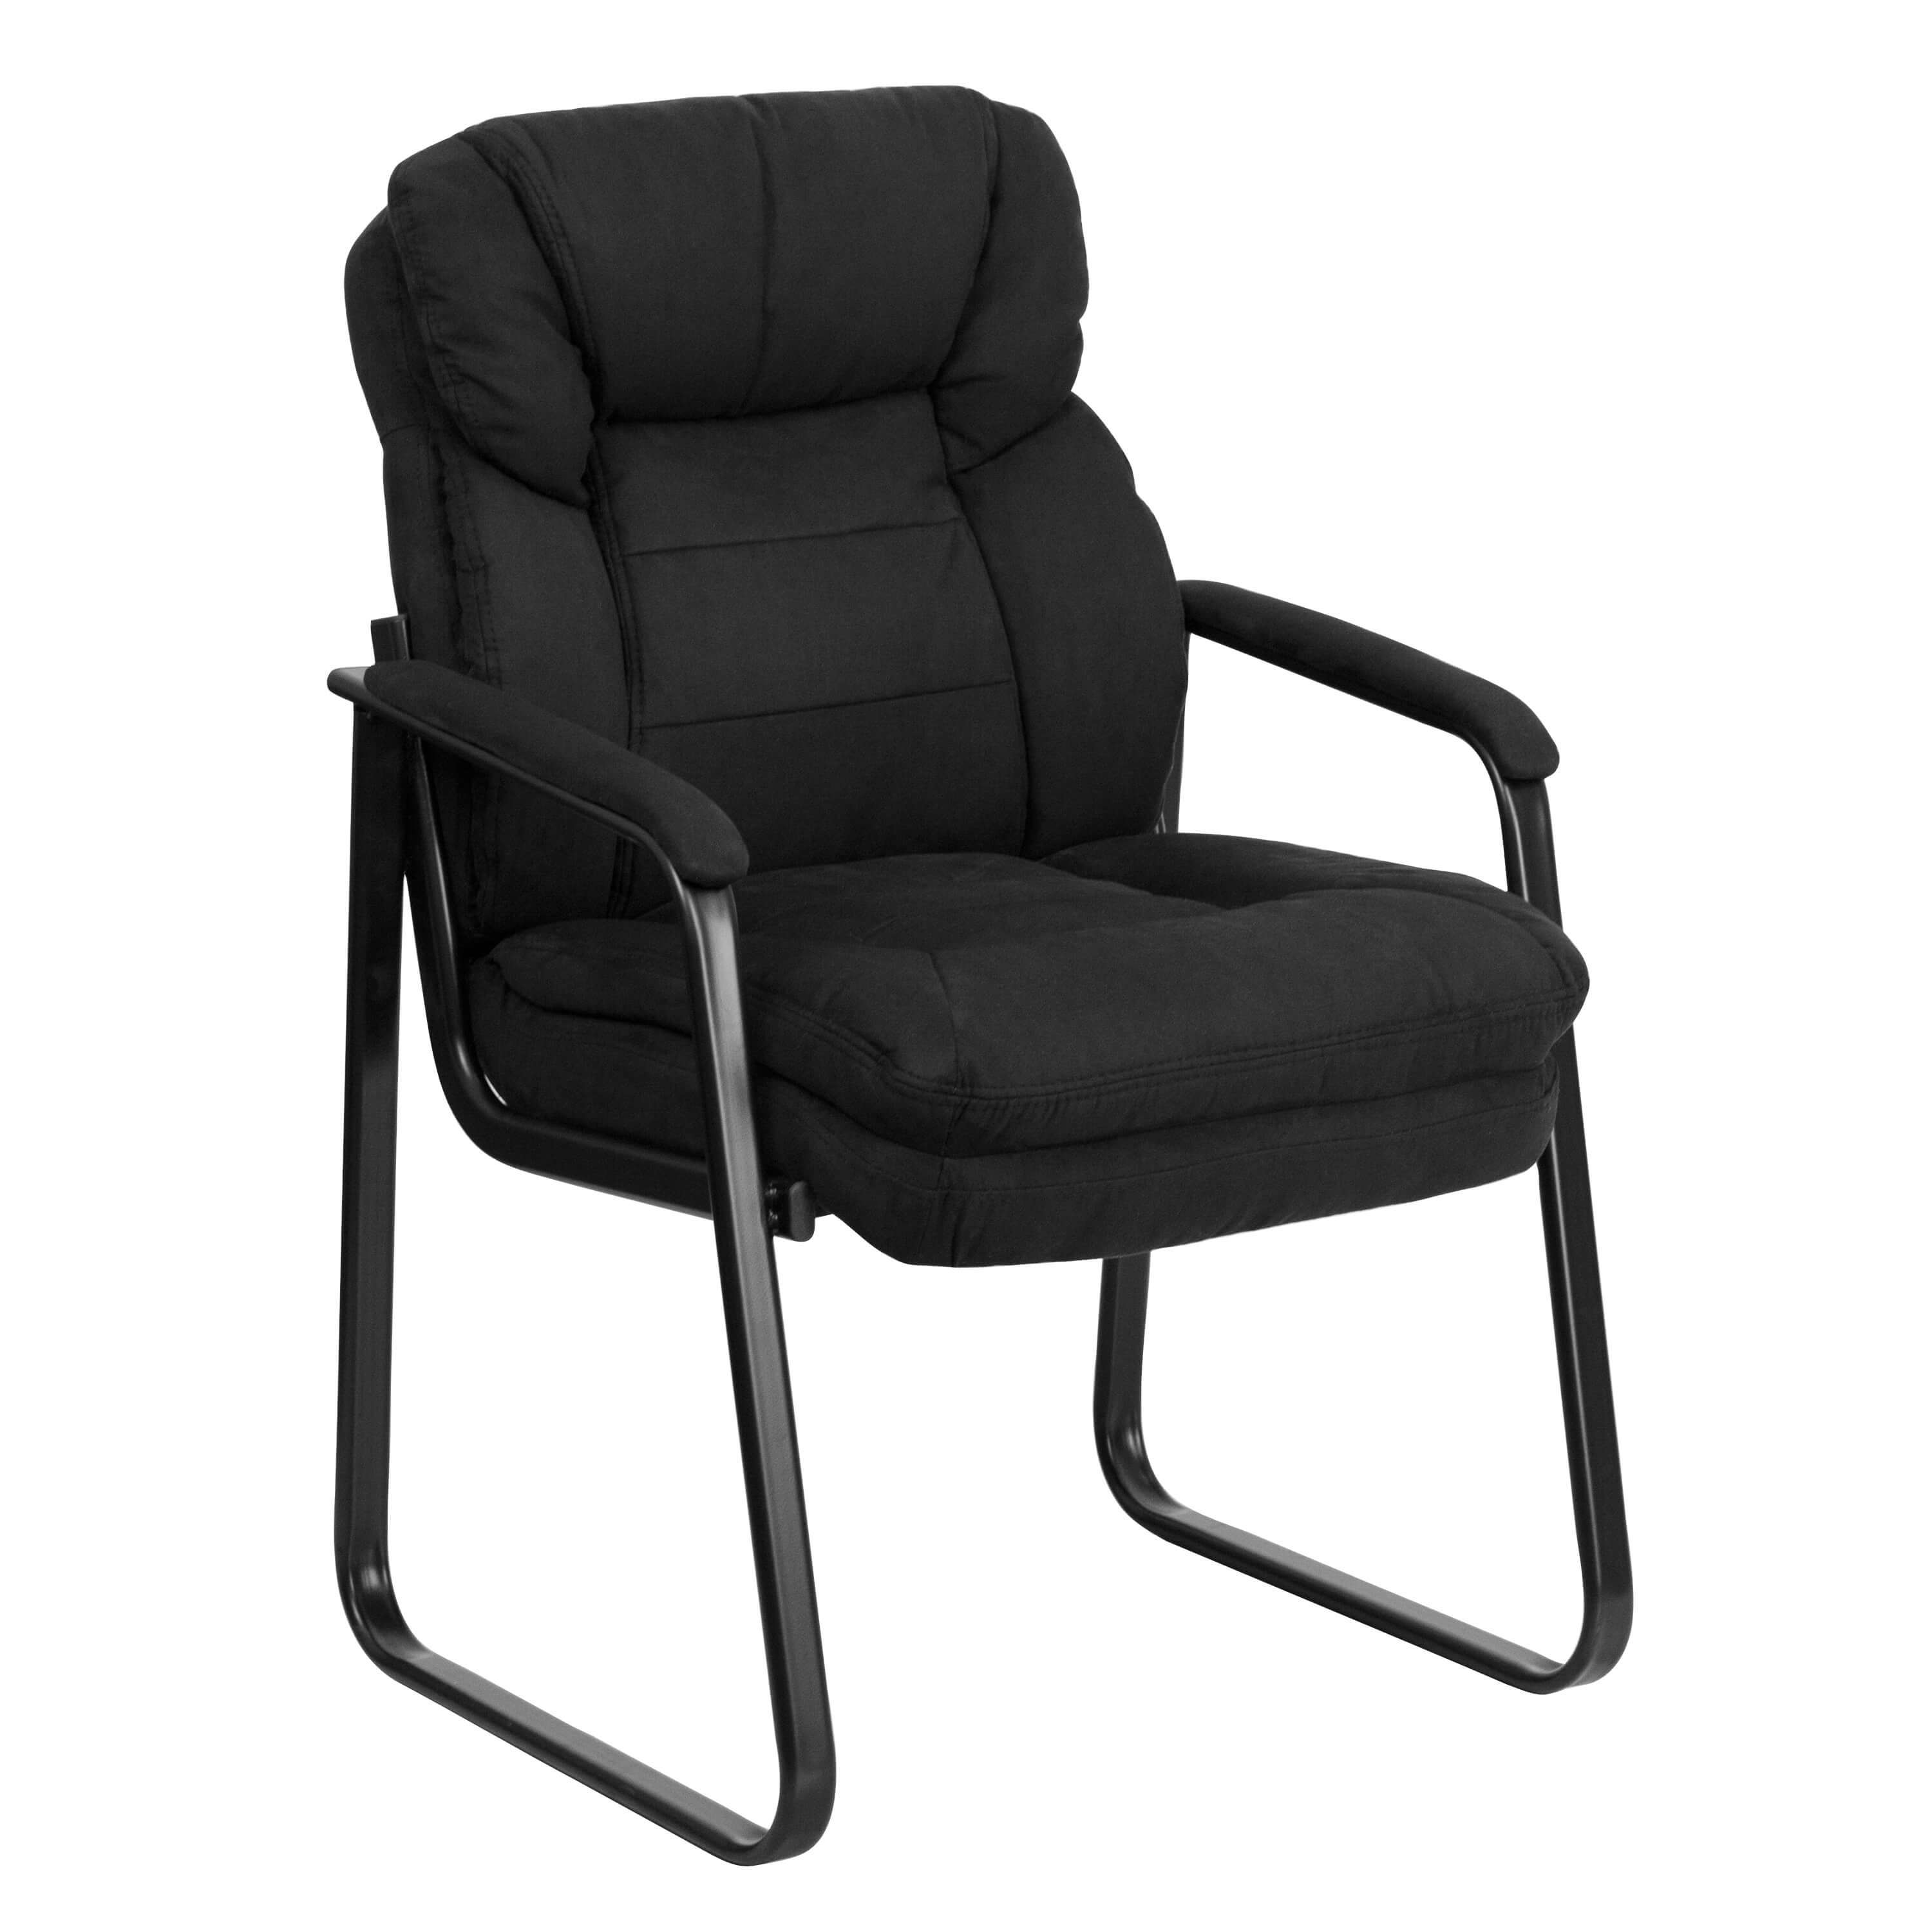 Side chairs with arms CUB GO 1156 BK GG ALF